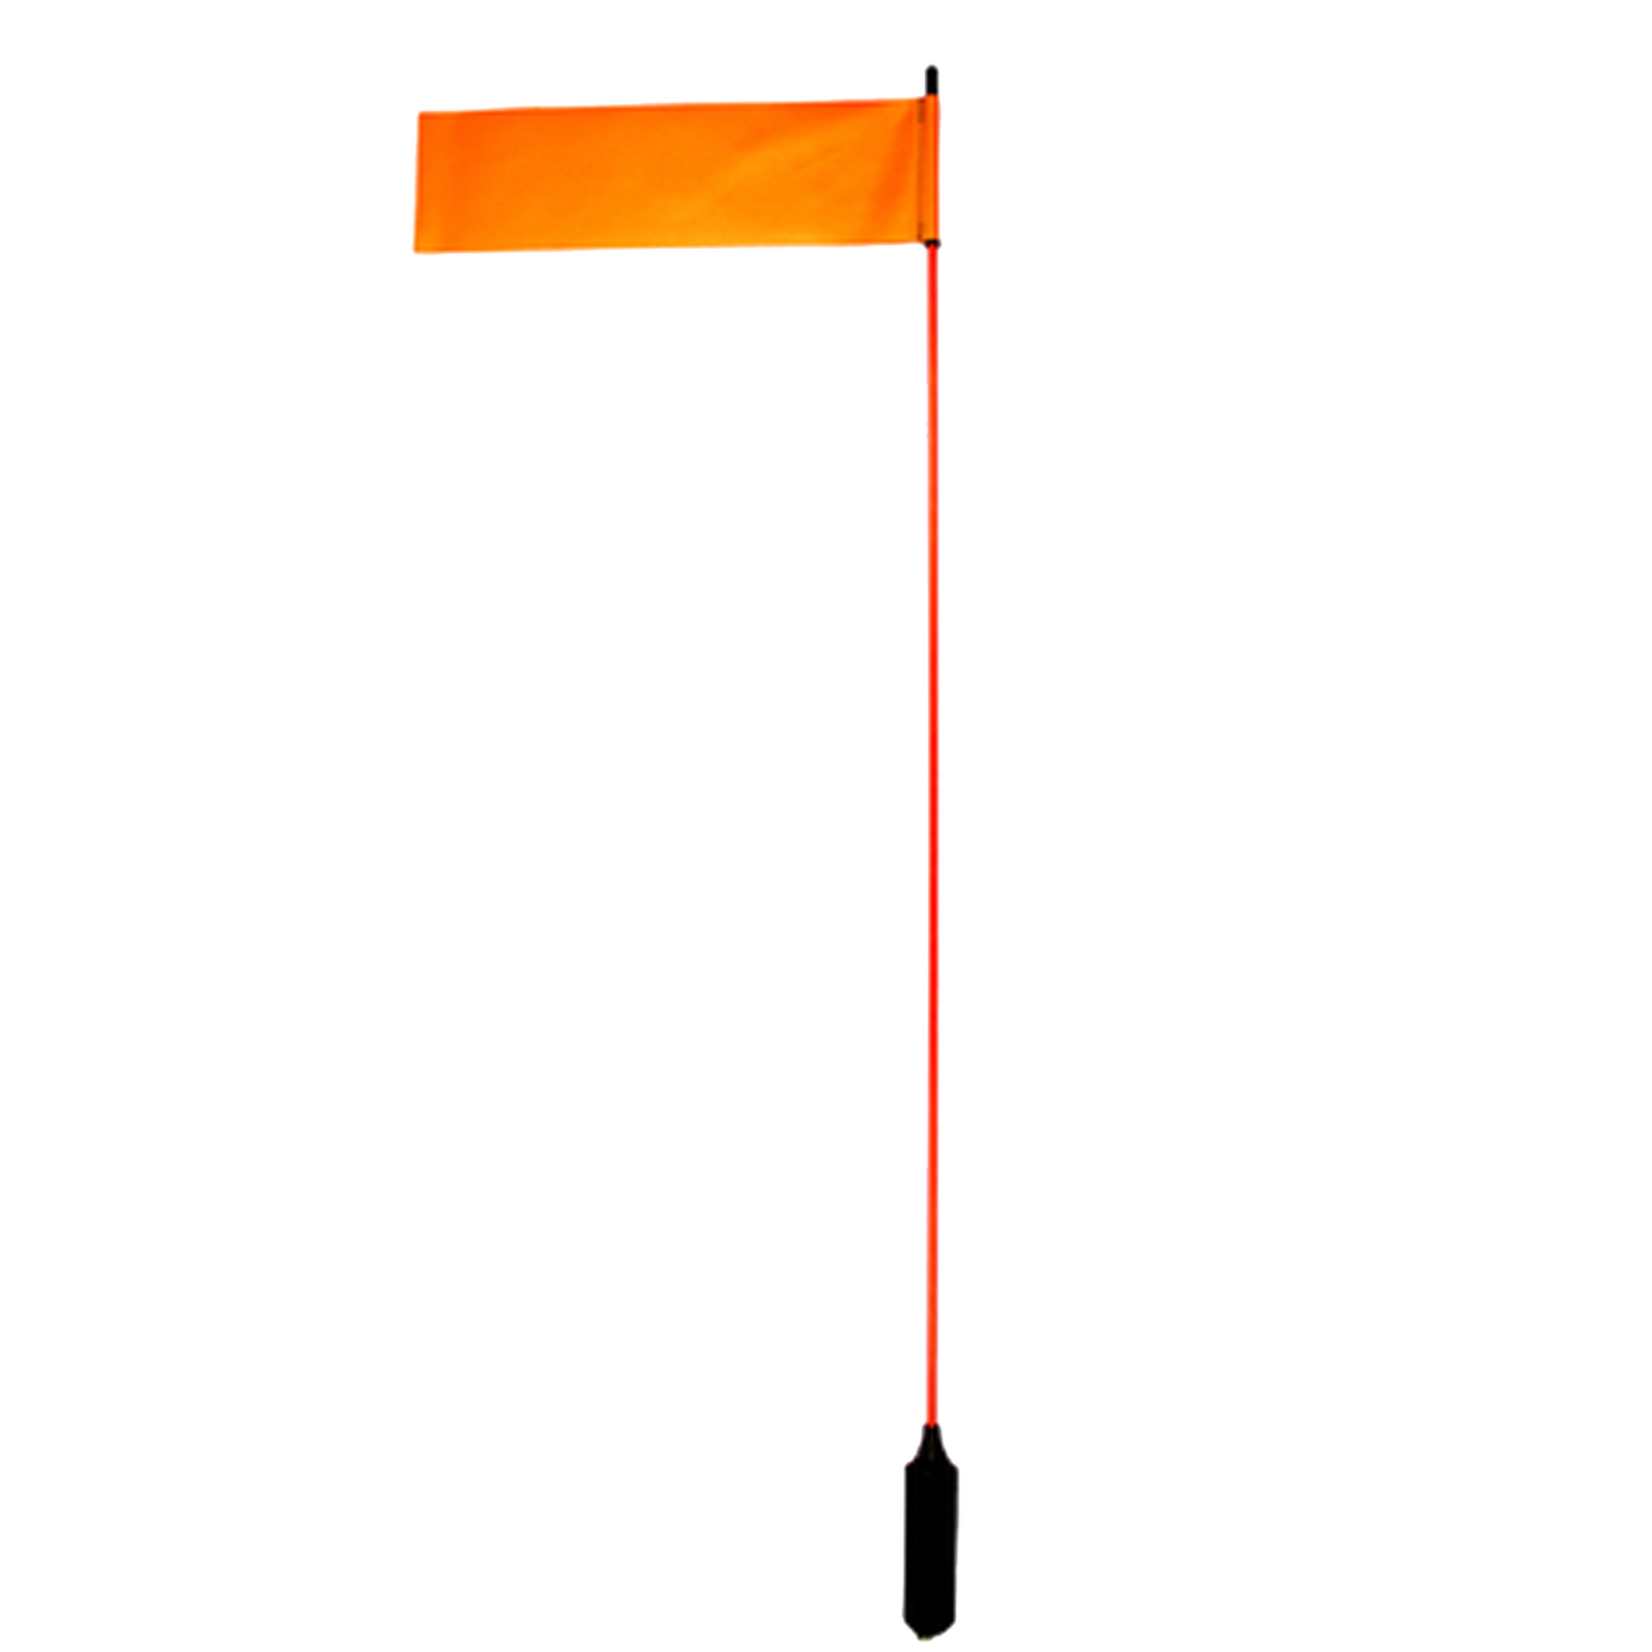 Yakattack VISIFlag, 52" tall mast with flag, Mighty Mount / GearTrac ready